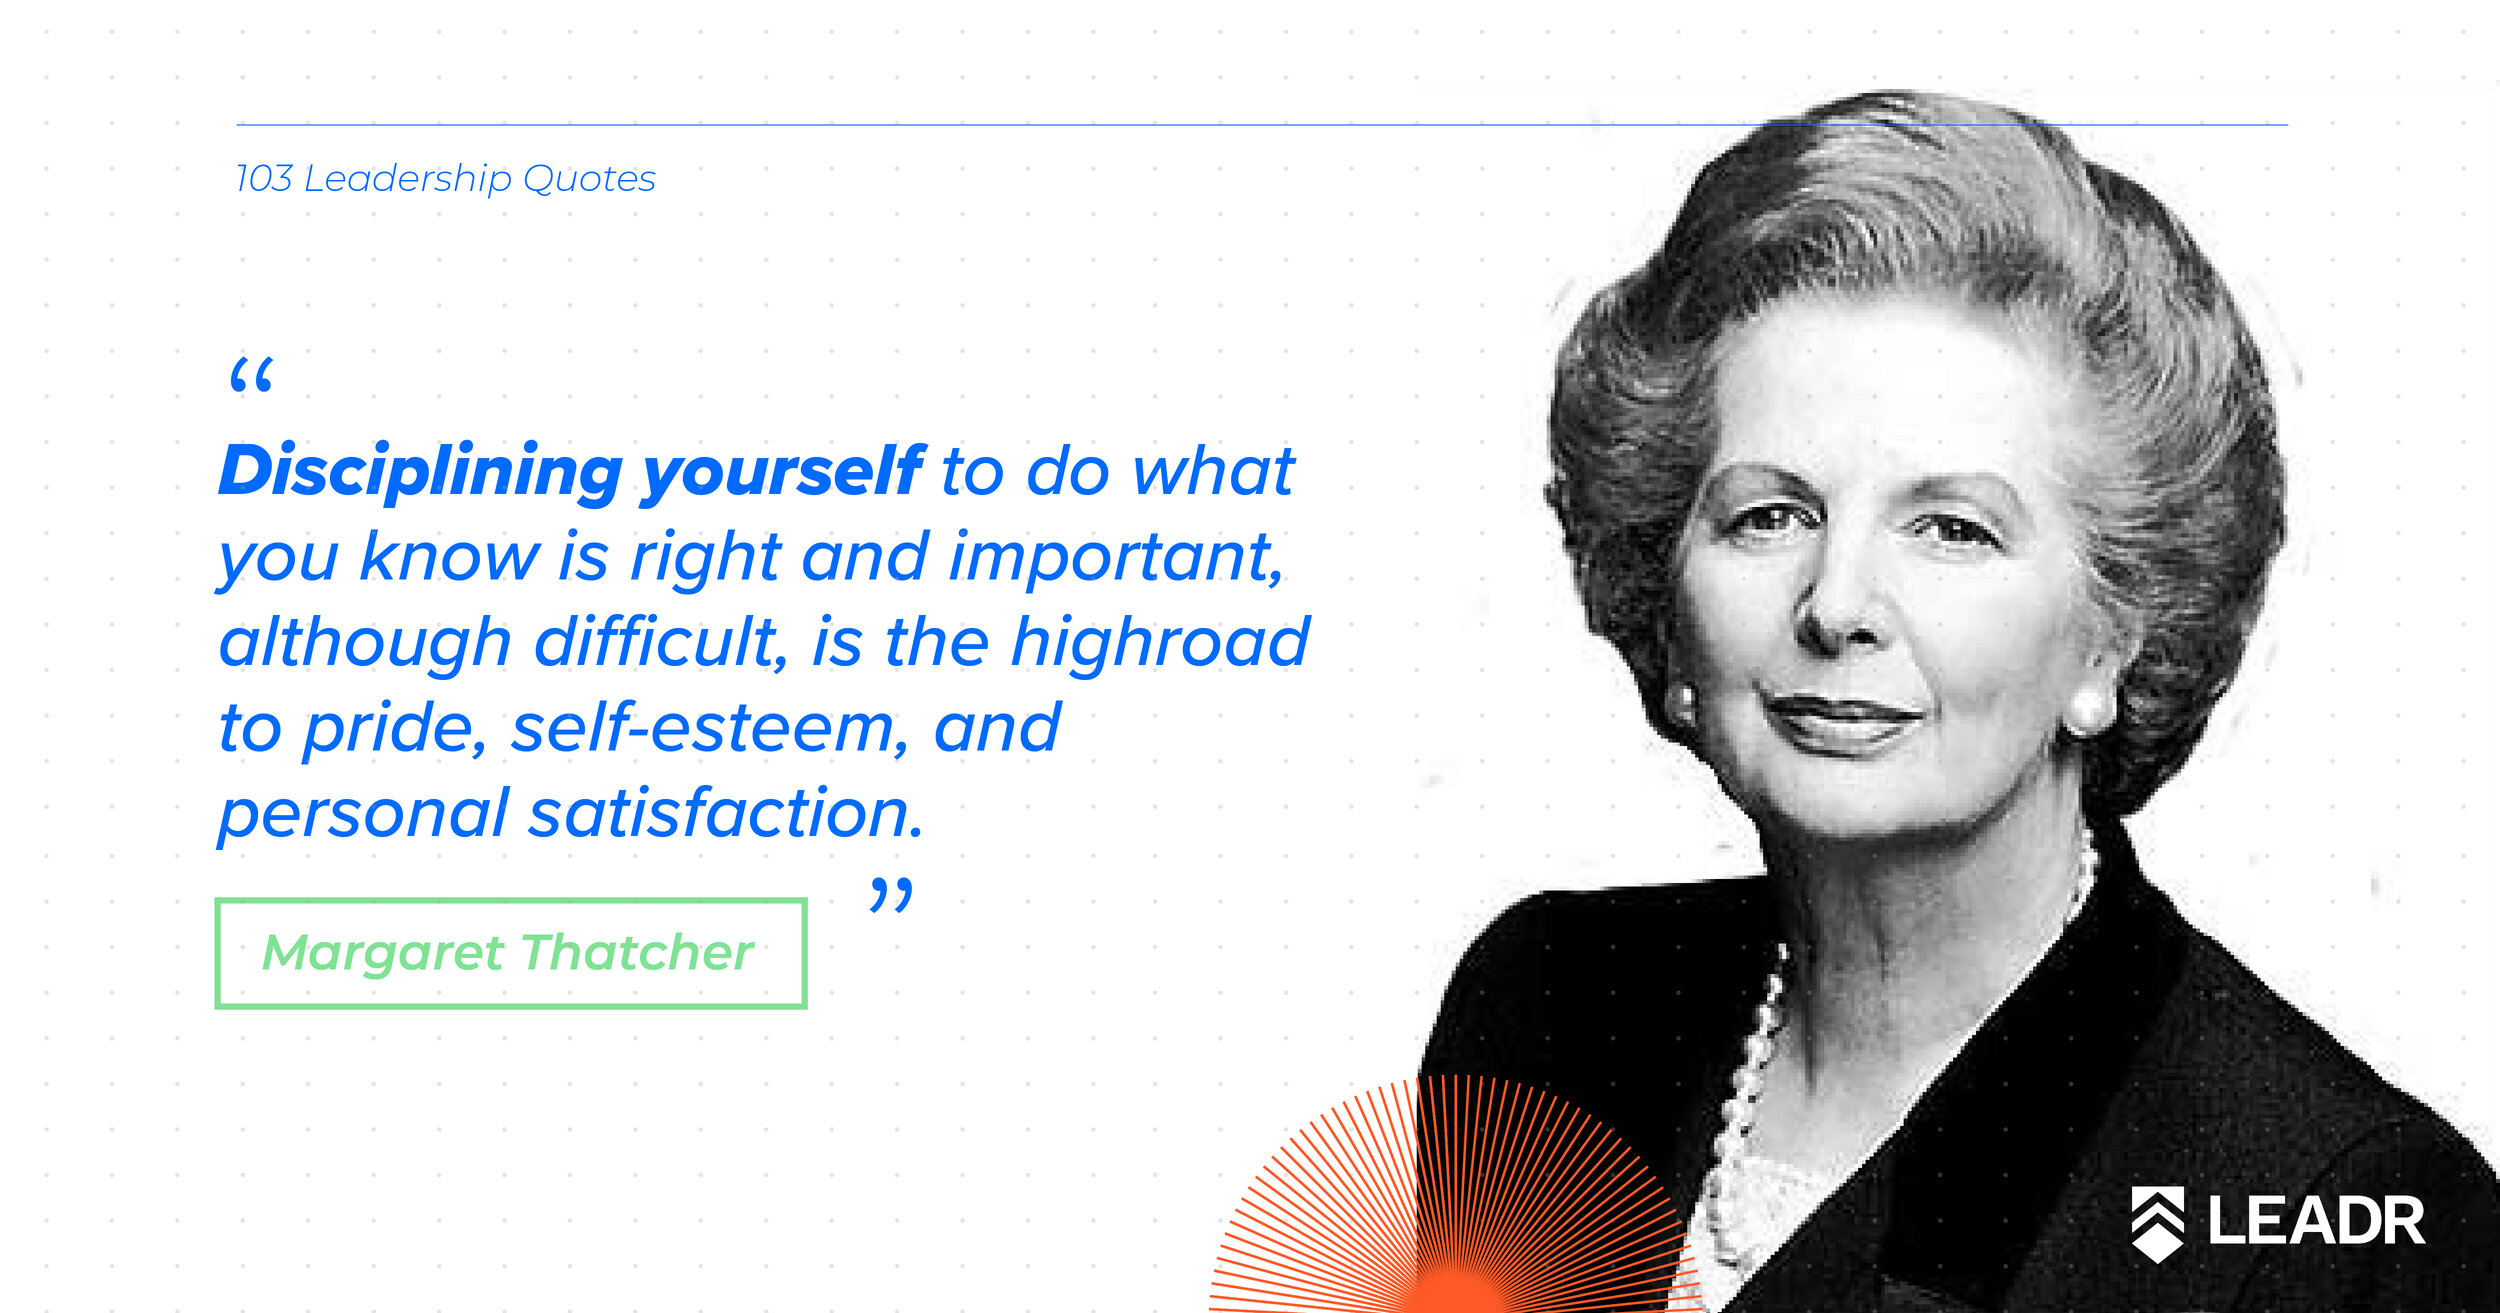 Royalty free downloadable leadership quotes - Margaret Thatcher